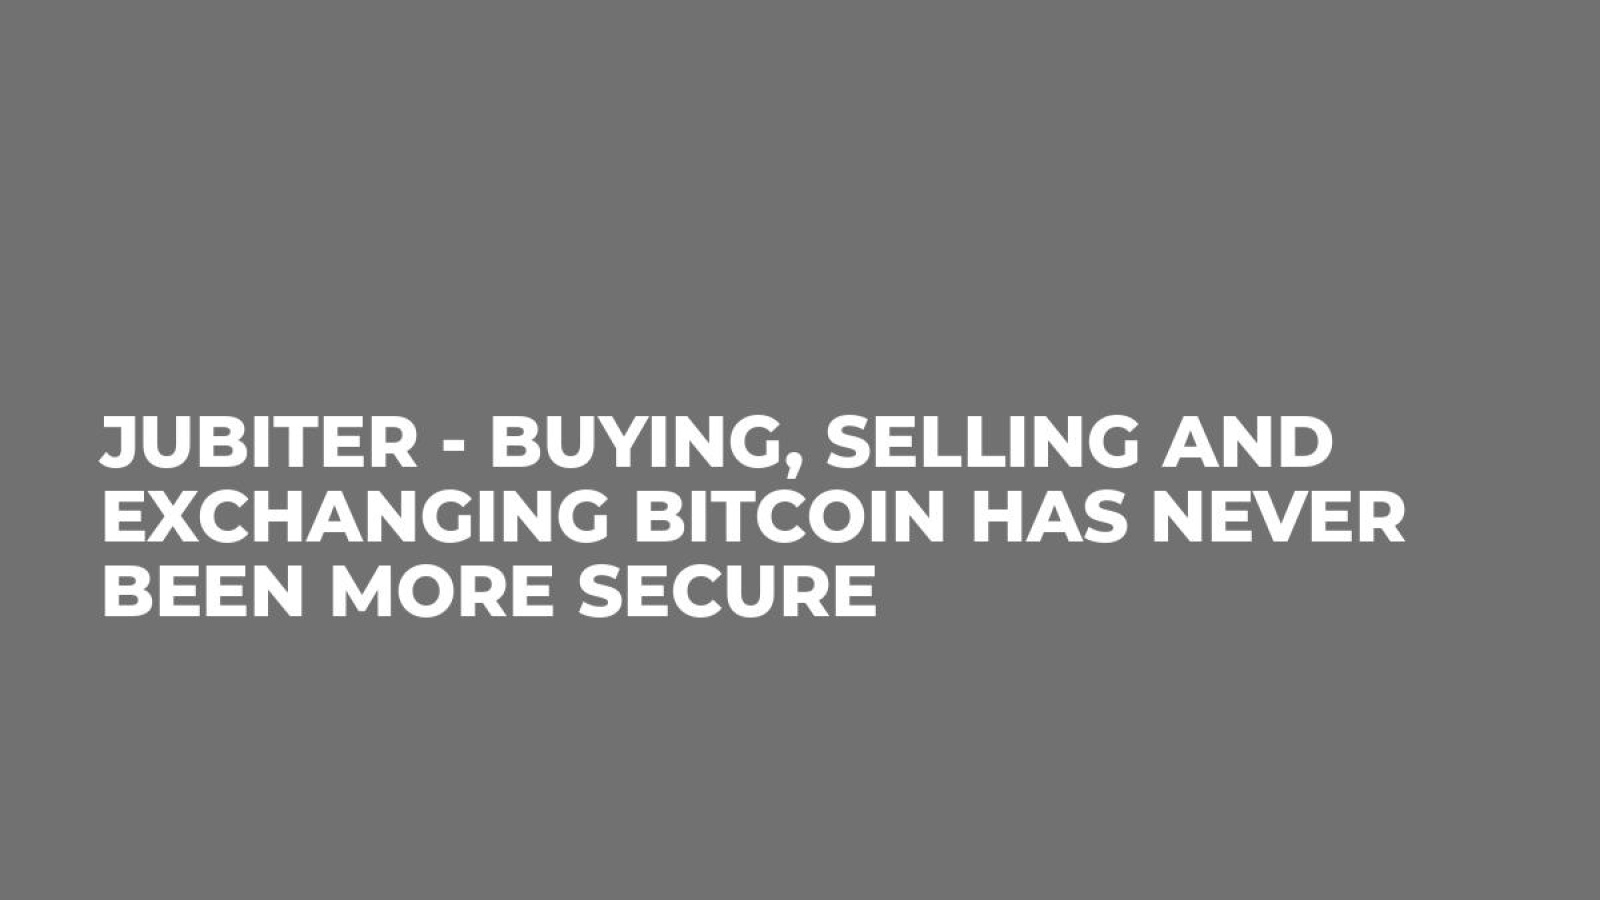 Jubiter - Buying, Selling and Exchanging Bitcoin Has Never Been More Secure